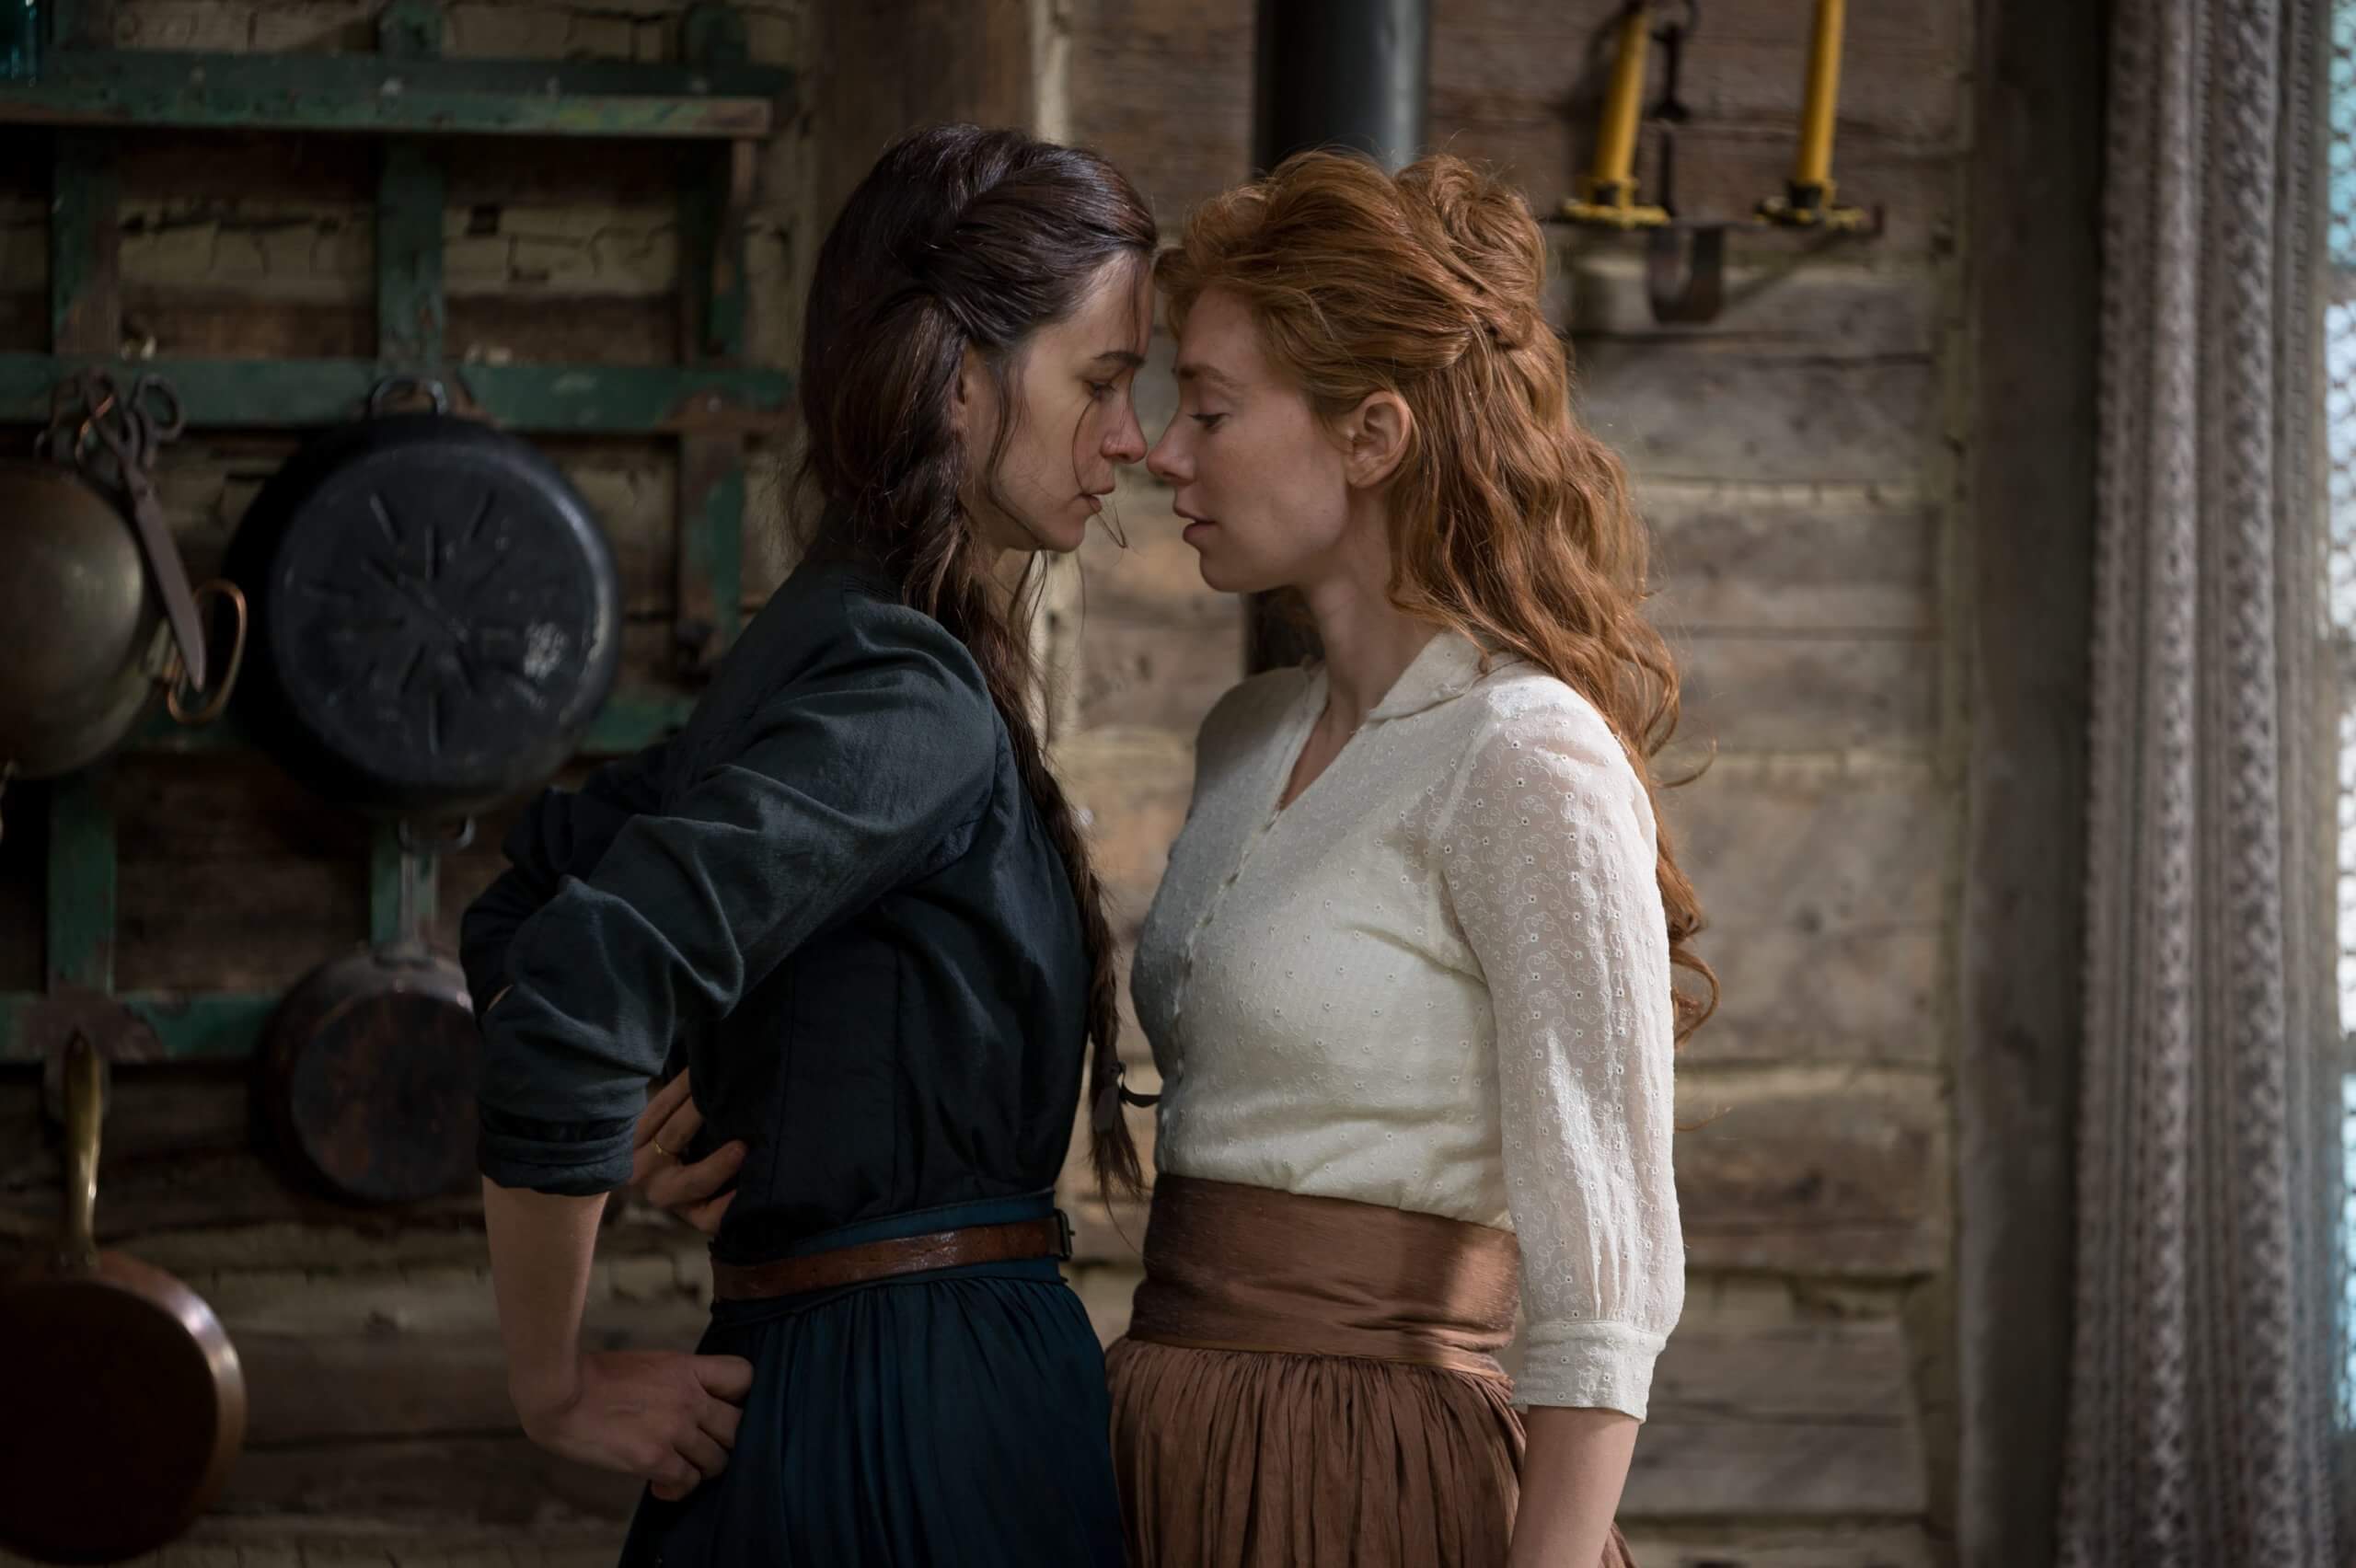 The World to Come” Presents a 19th Century Lesbian Love Story